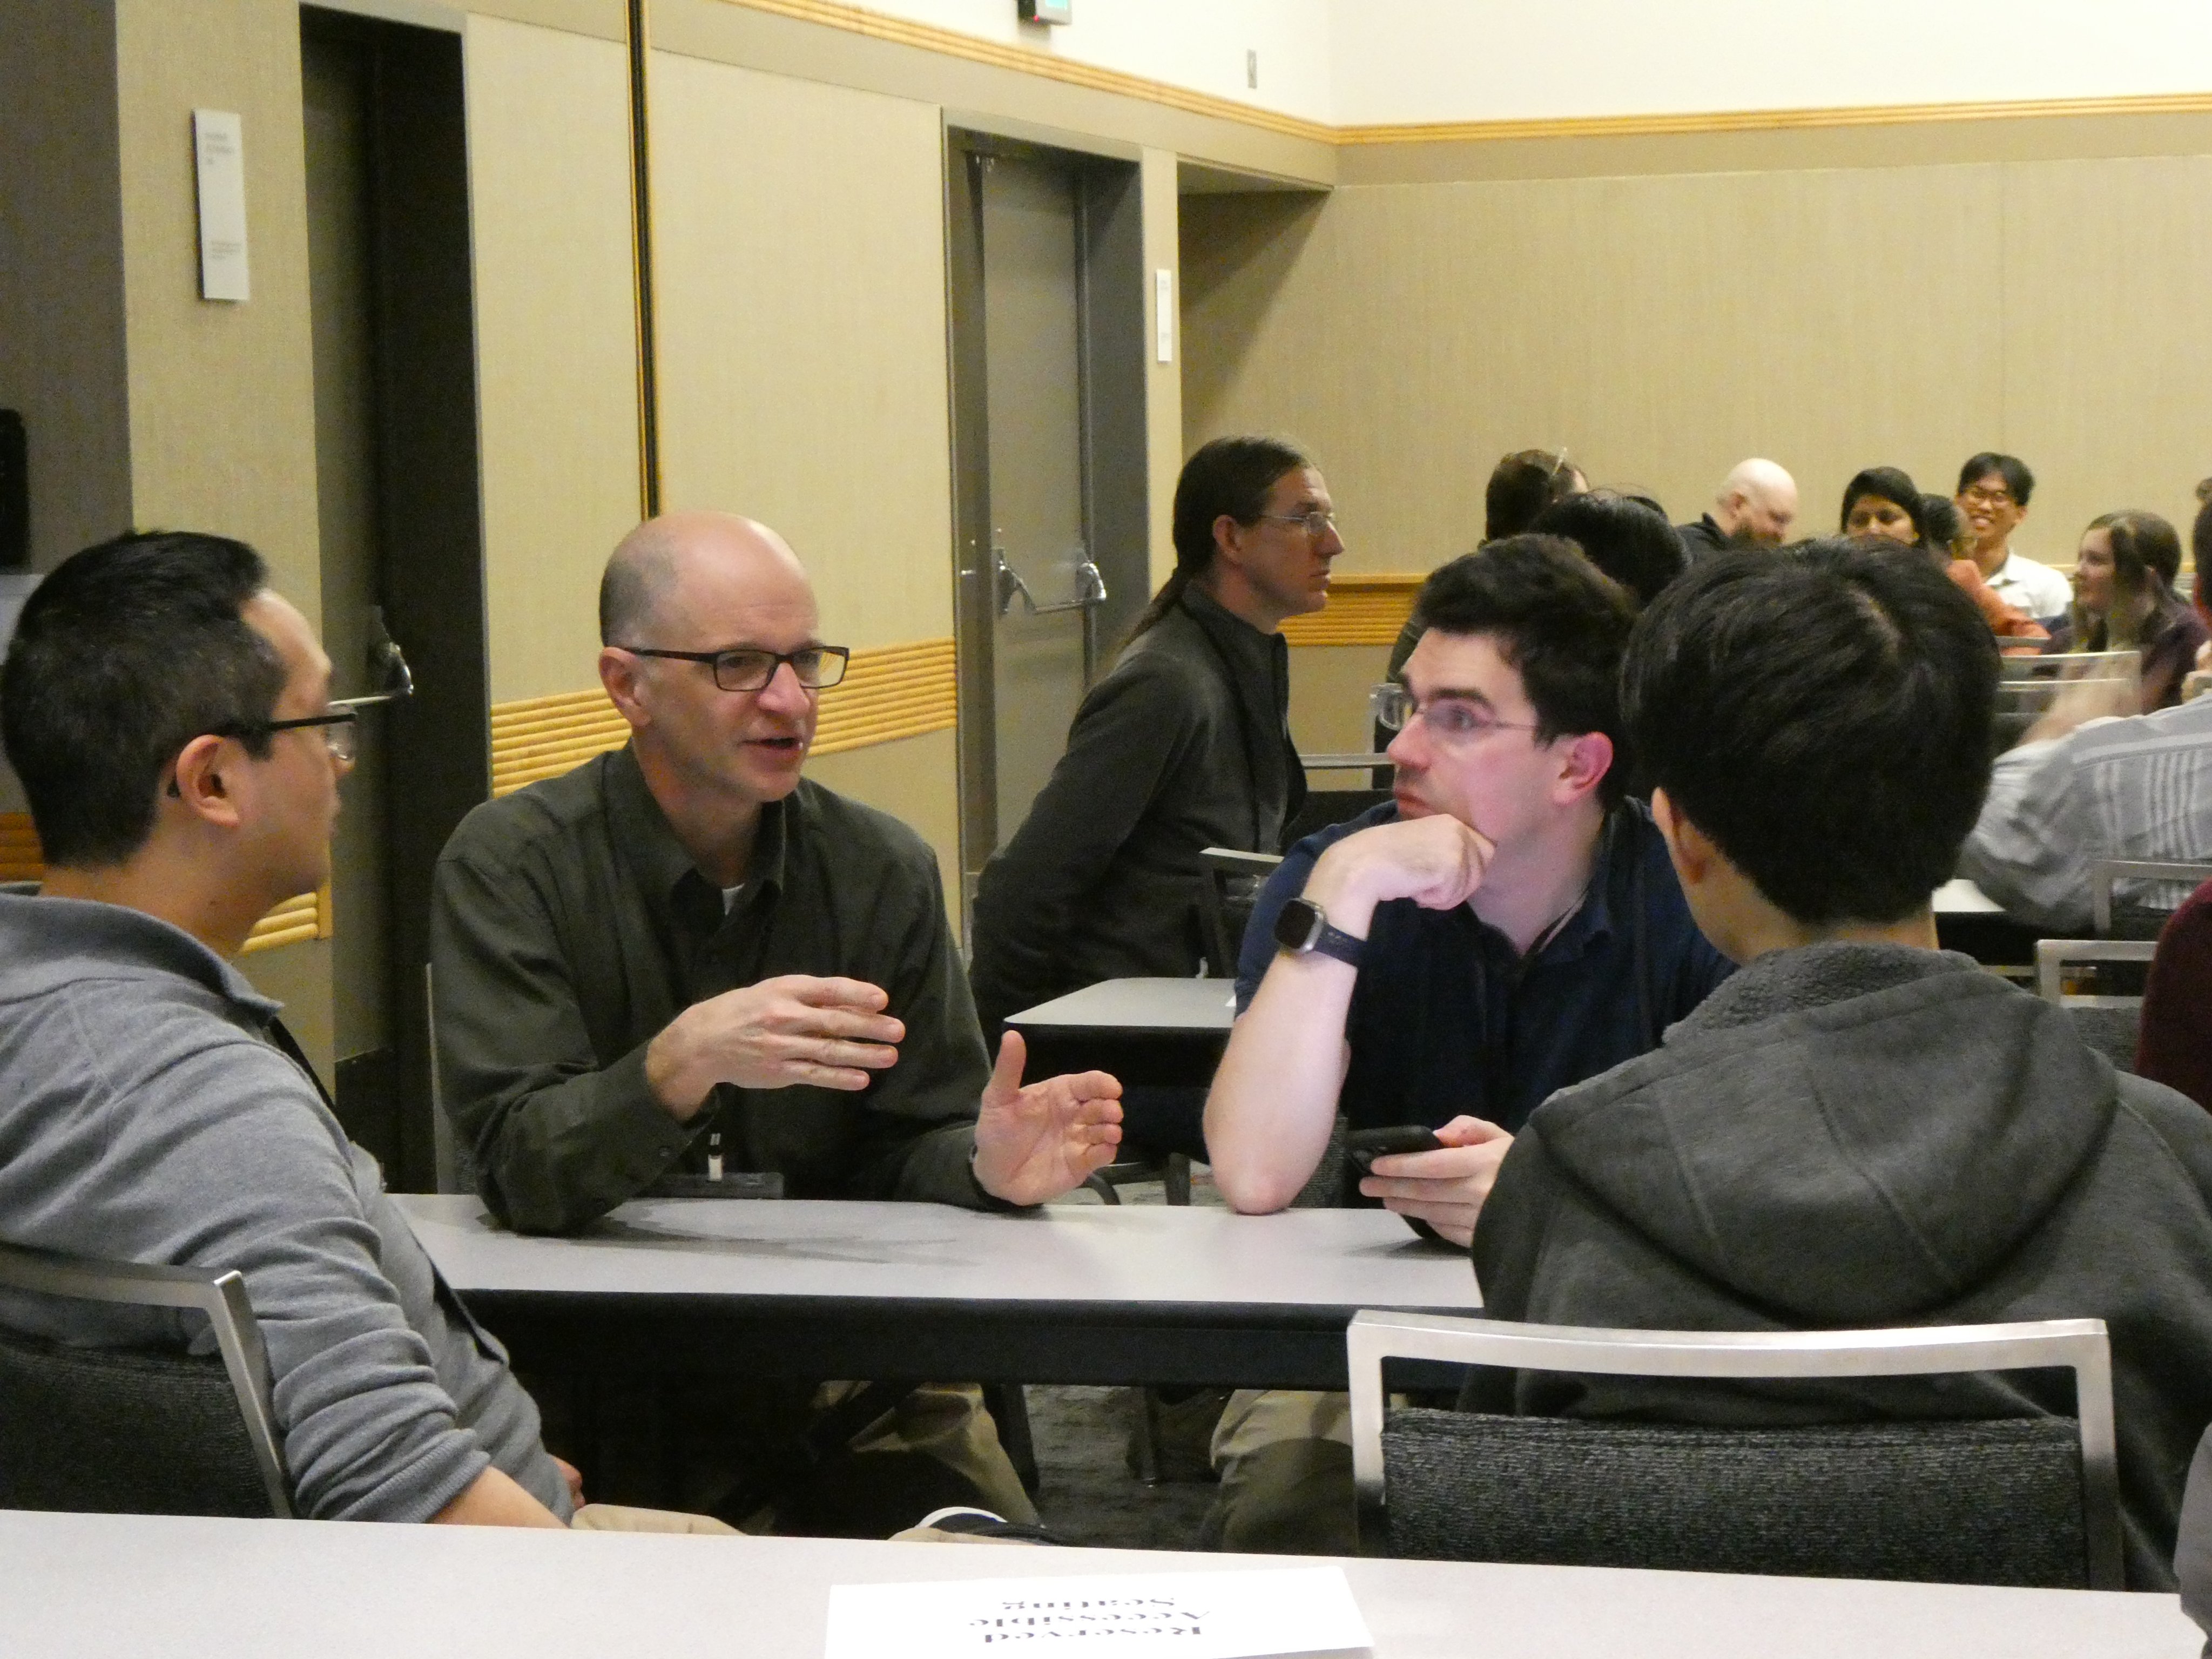 Groups discuss TA programs in 'Birds of a Feather' talk.